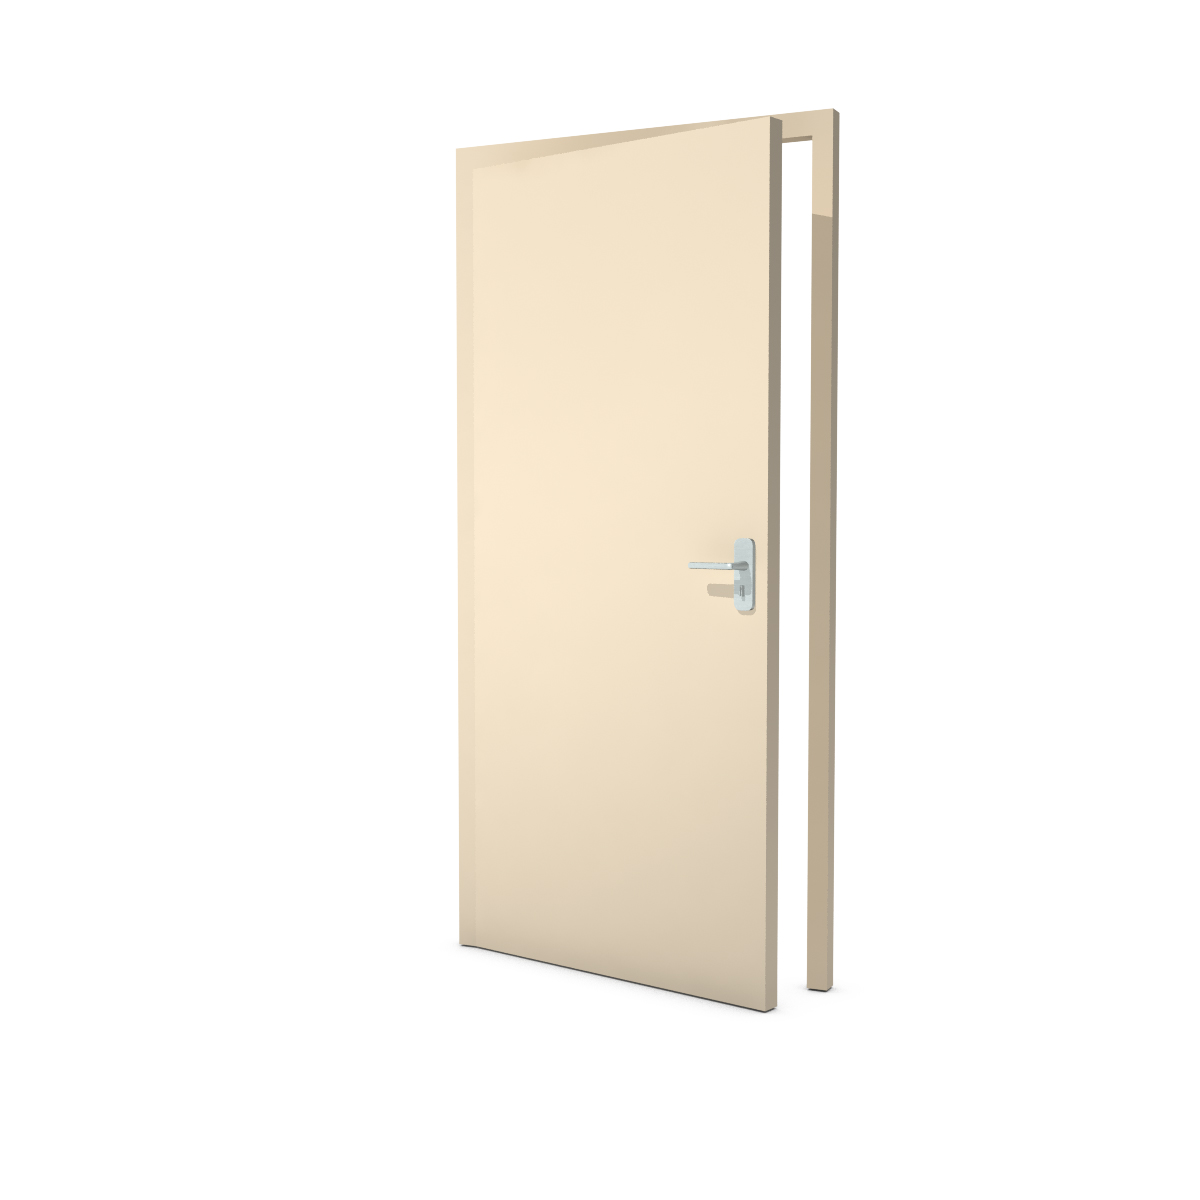 Single door covered in solid-color textile - Wheat yellow